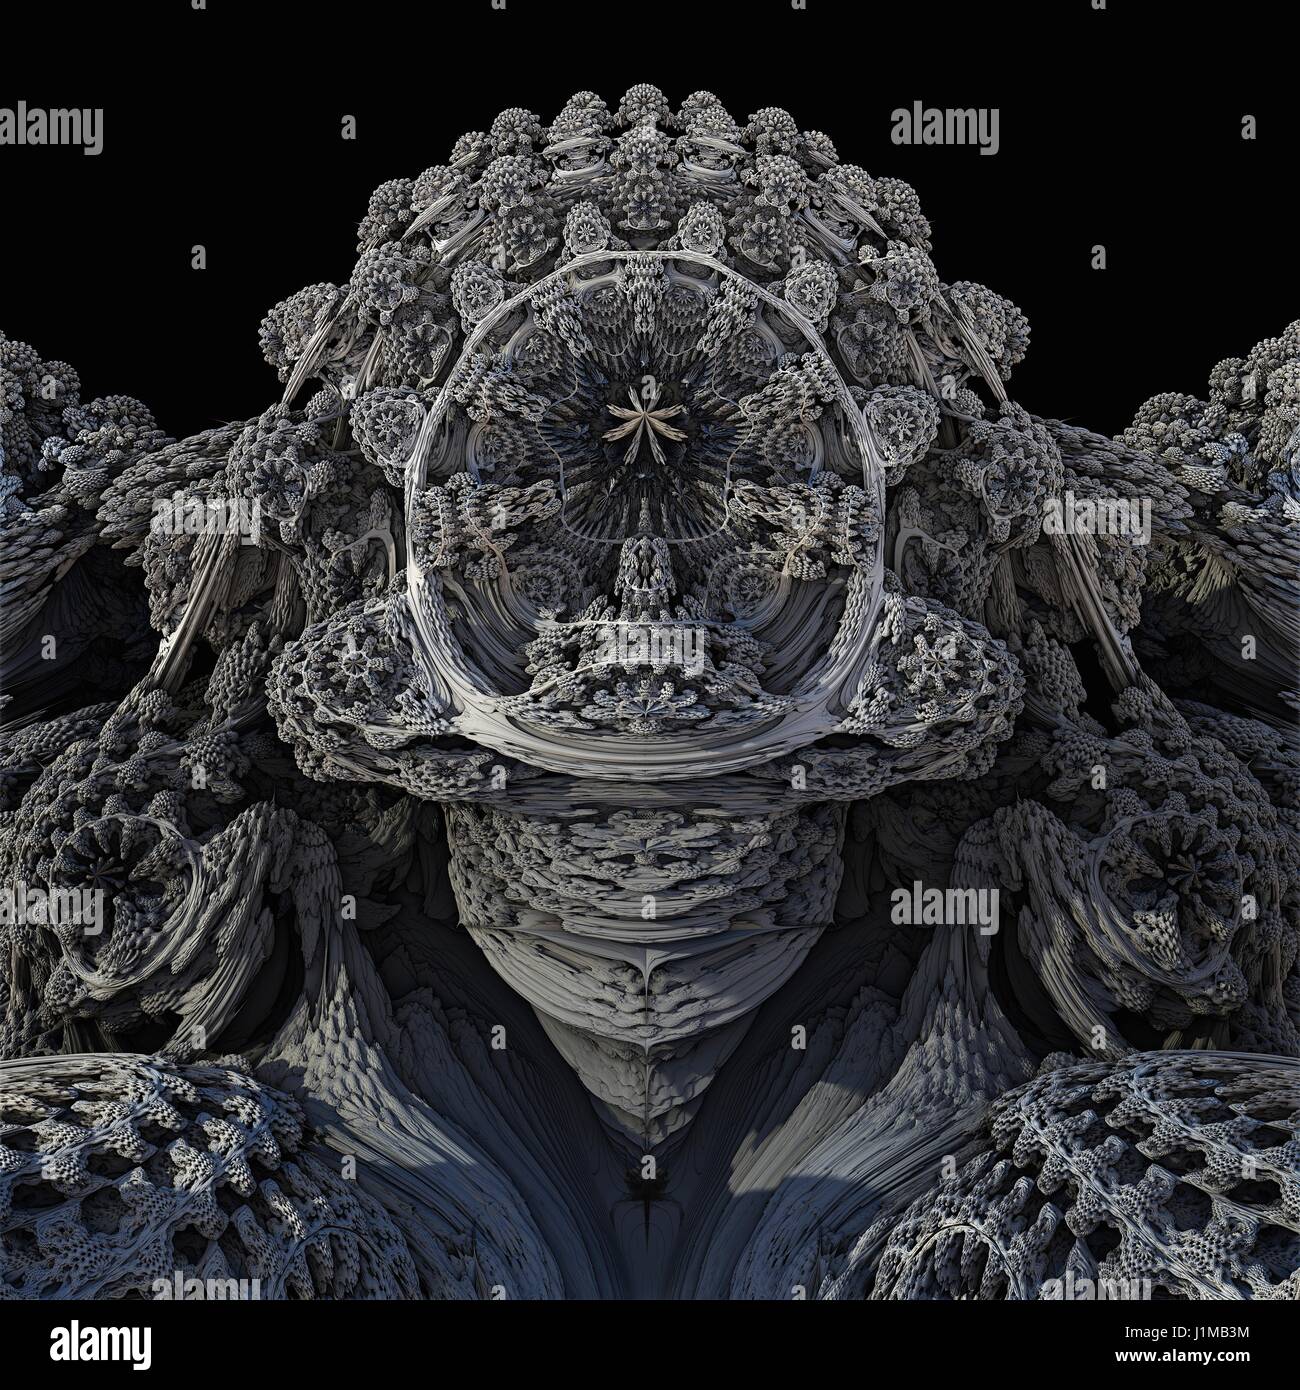 Mandelbulb fractal close-up. Computer-generated image of a three-dimensional analogue derived form a Mandelbrot Set using spherical coordinates. Stock Photo